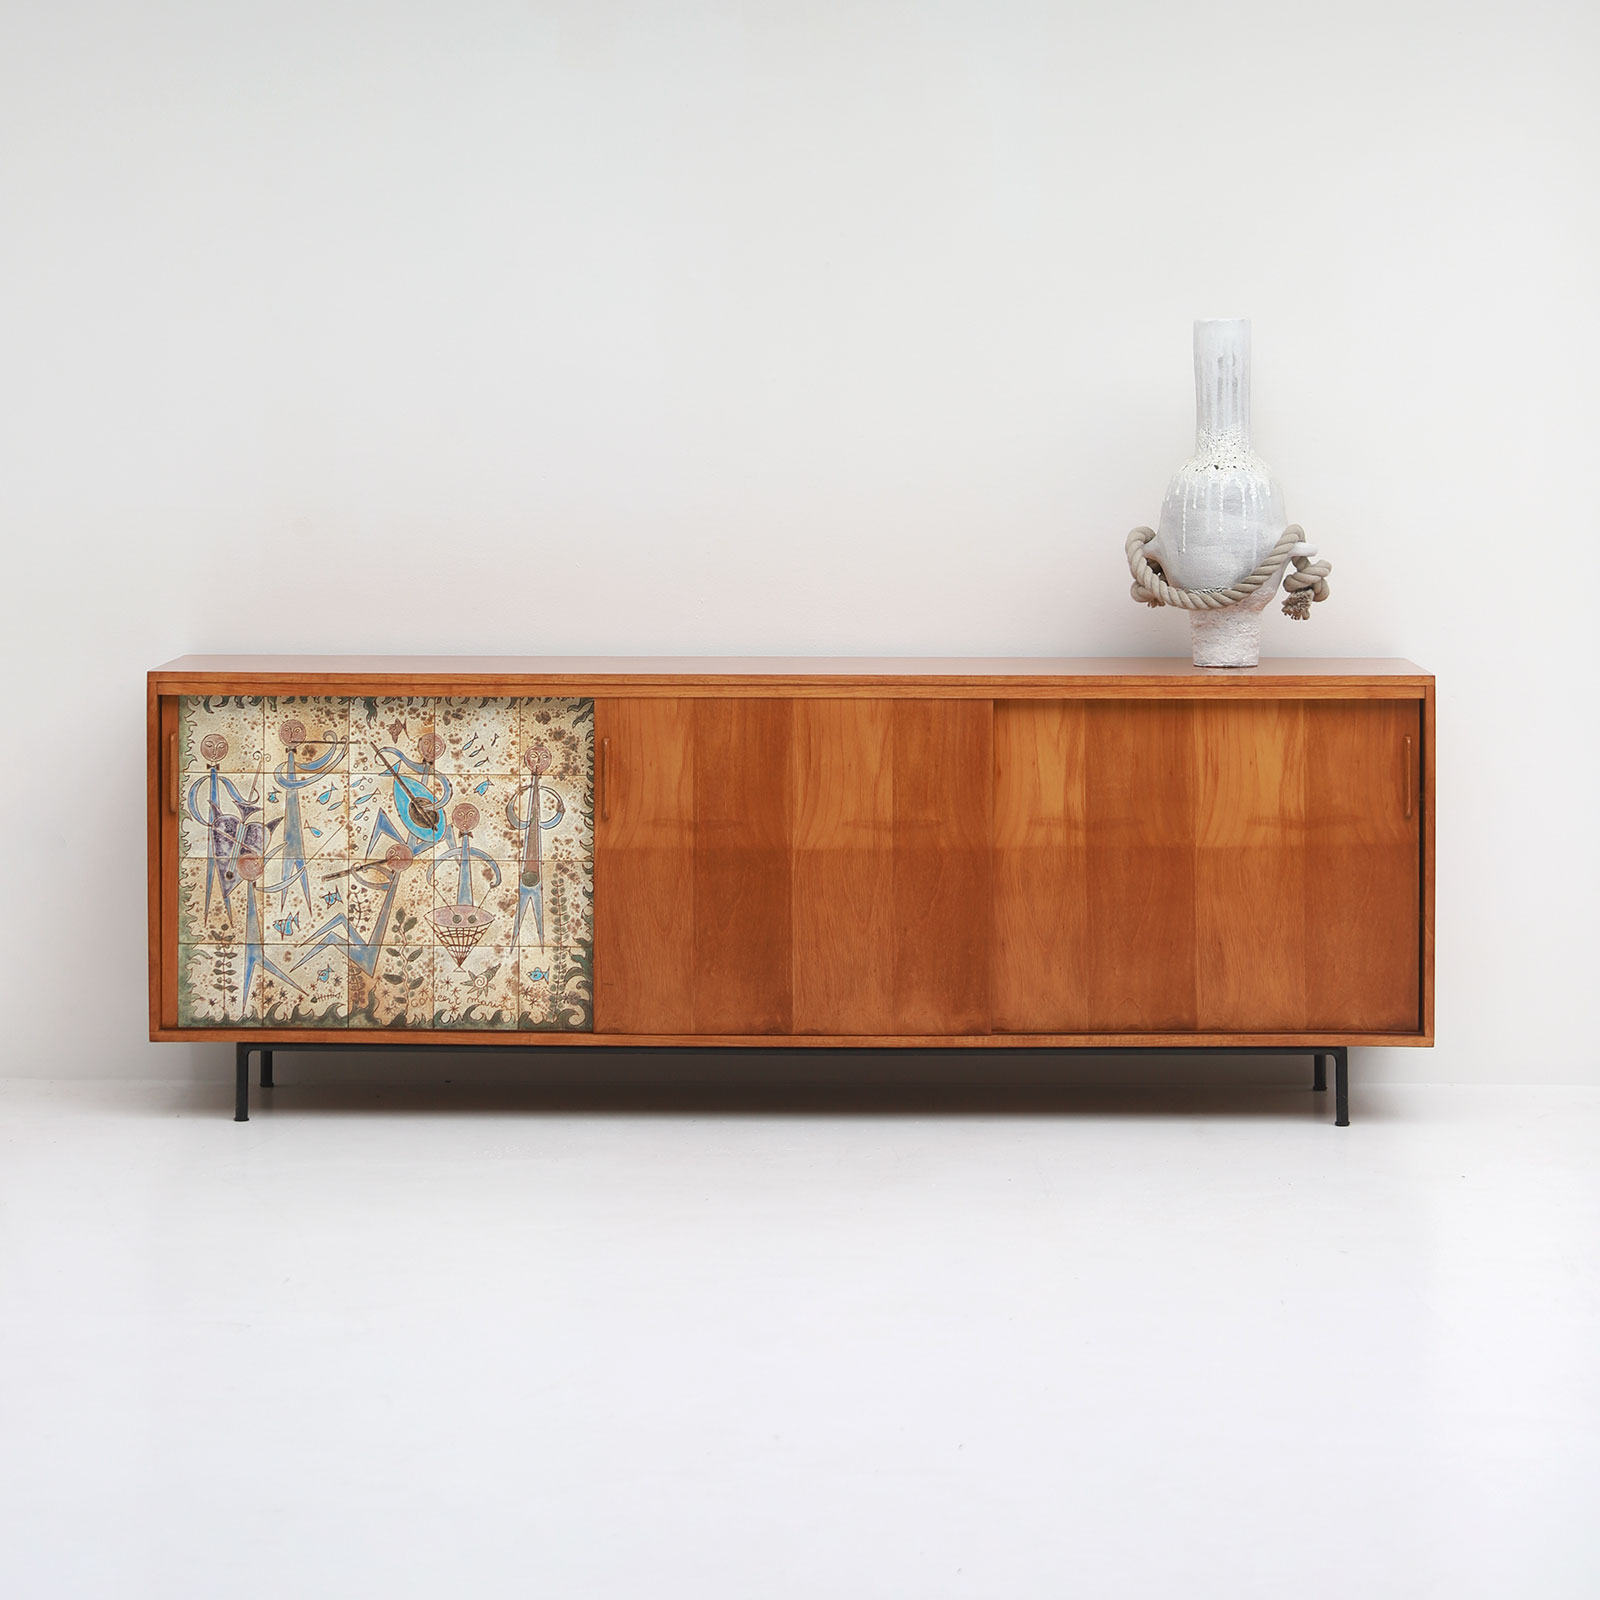 Sideboard with Ceramic Tiles Charles-Emile Pinson 1958